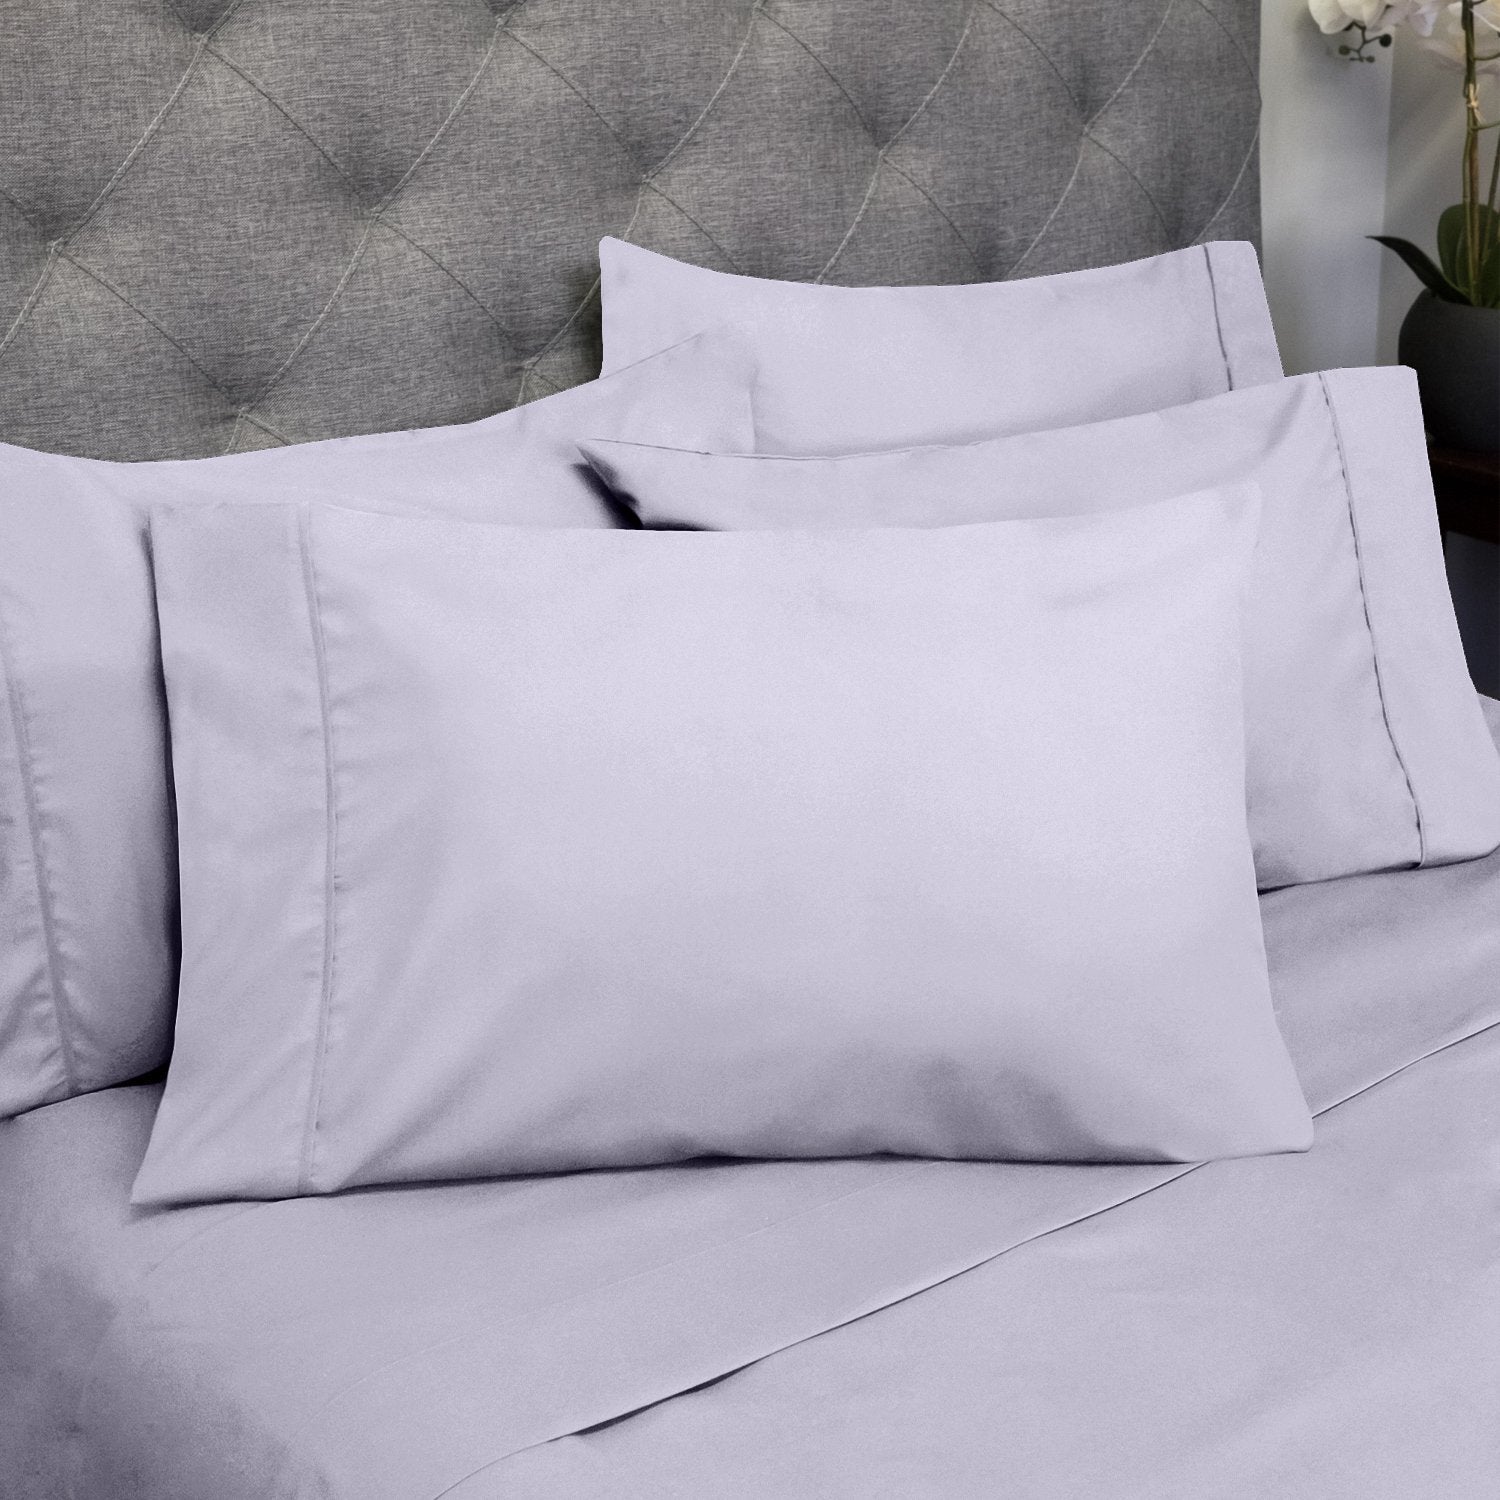 Deluxe 6-Piece Bed Sheet Set (Lilac) - Pillowcases